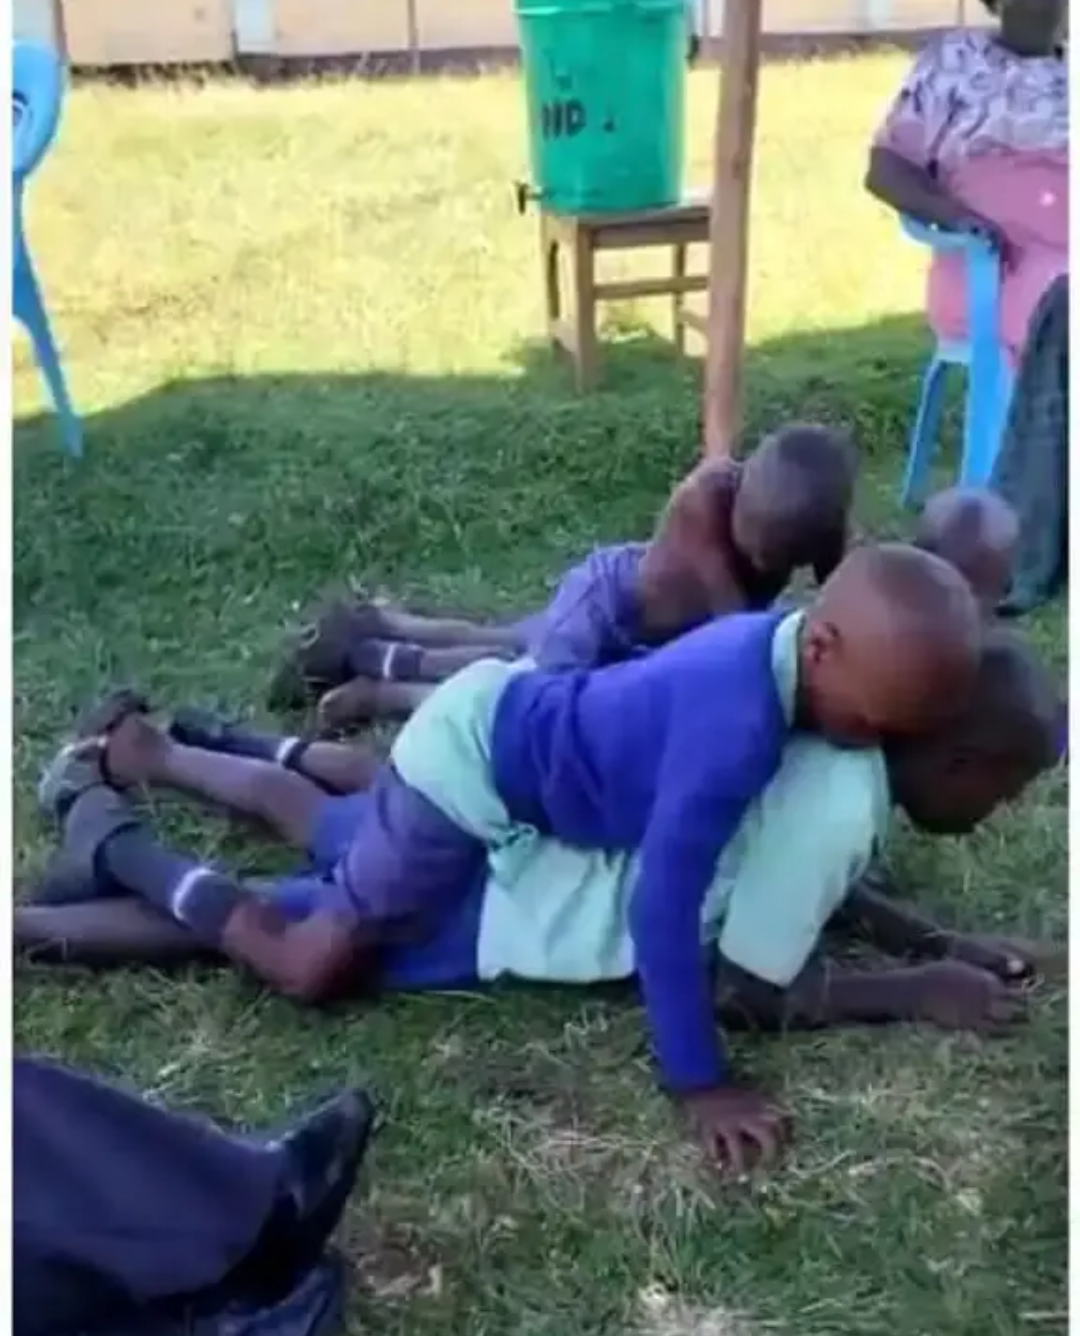 Itumbe DOK Teachers Who Forced Pupils to do Indecent Acts Get Interdicted